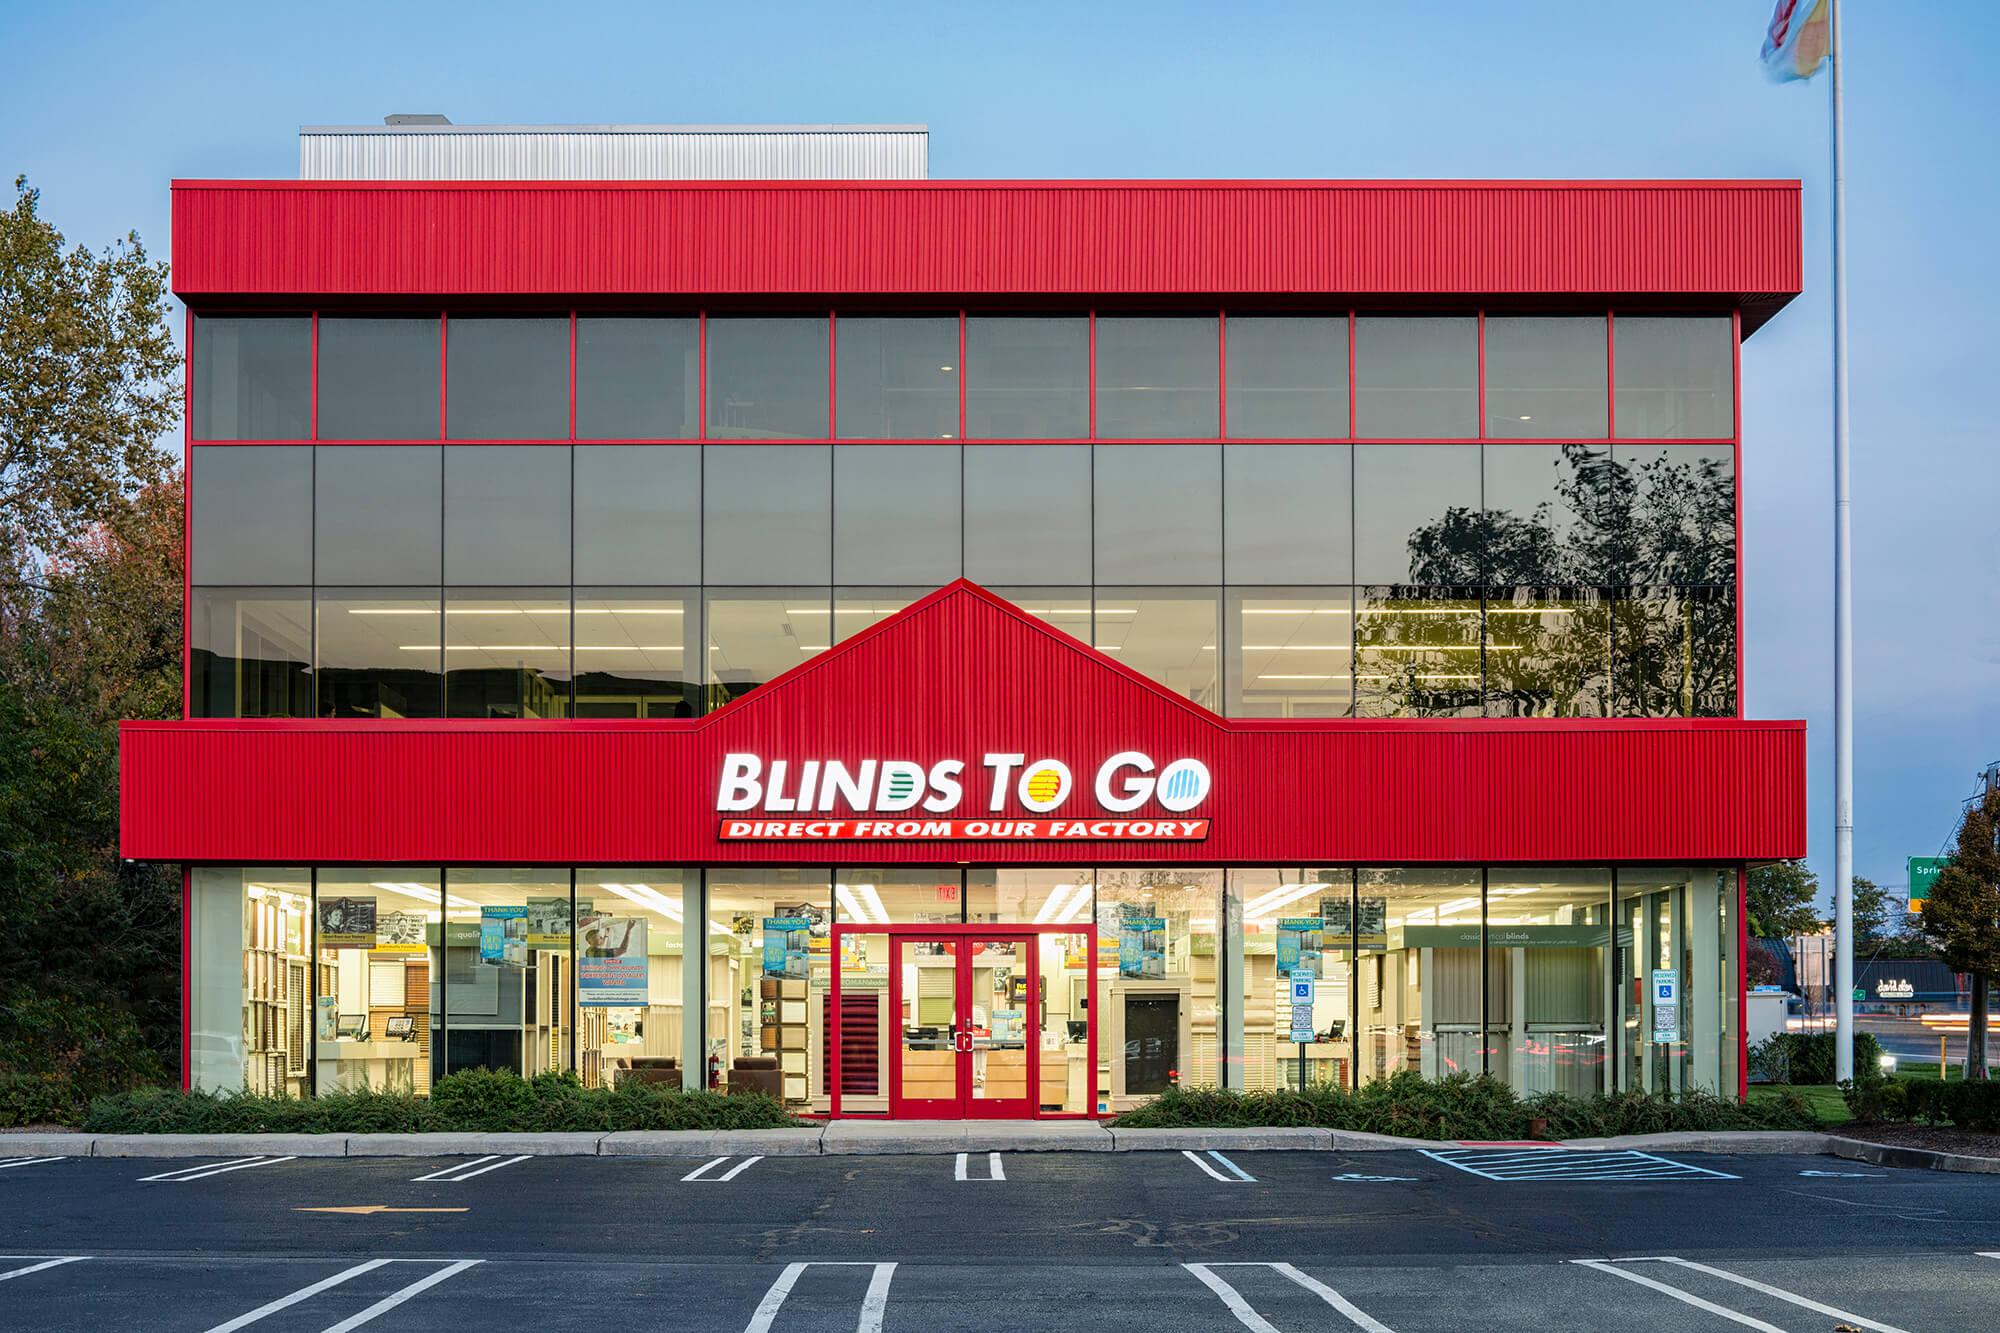 The Paramus Blinds To Go showroom at 101 Route 4 features blinds, shades, drapery, and shutters.